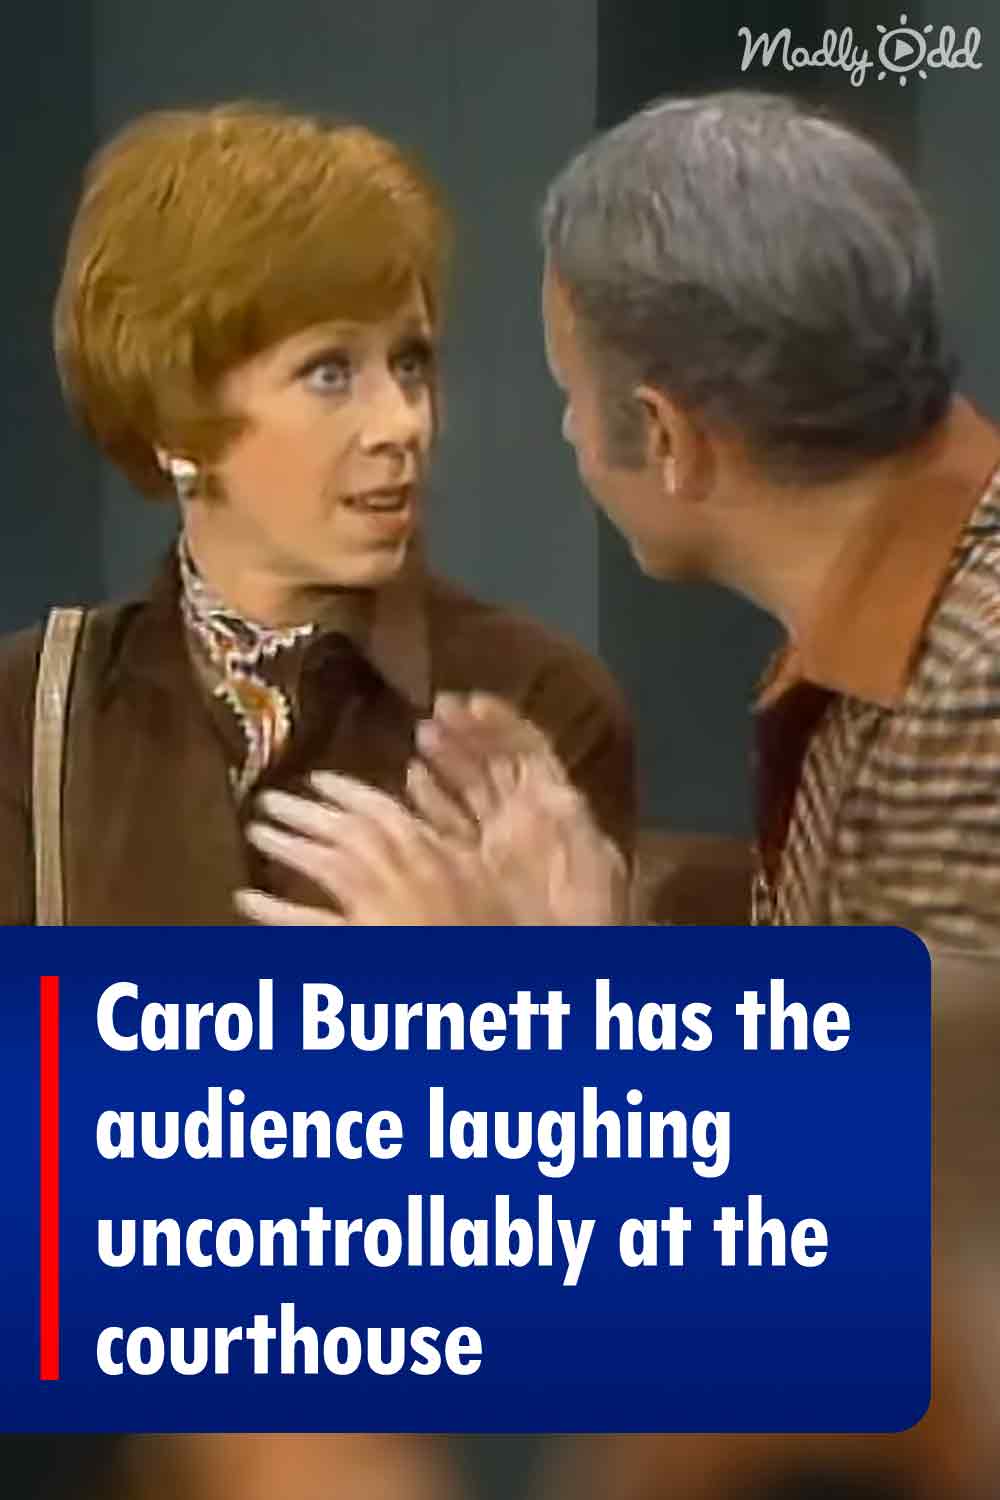 Carol Burnett has the audience laughing uncontrollably at the courthouse